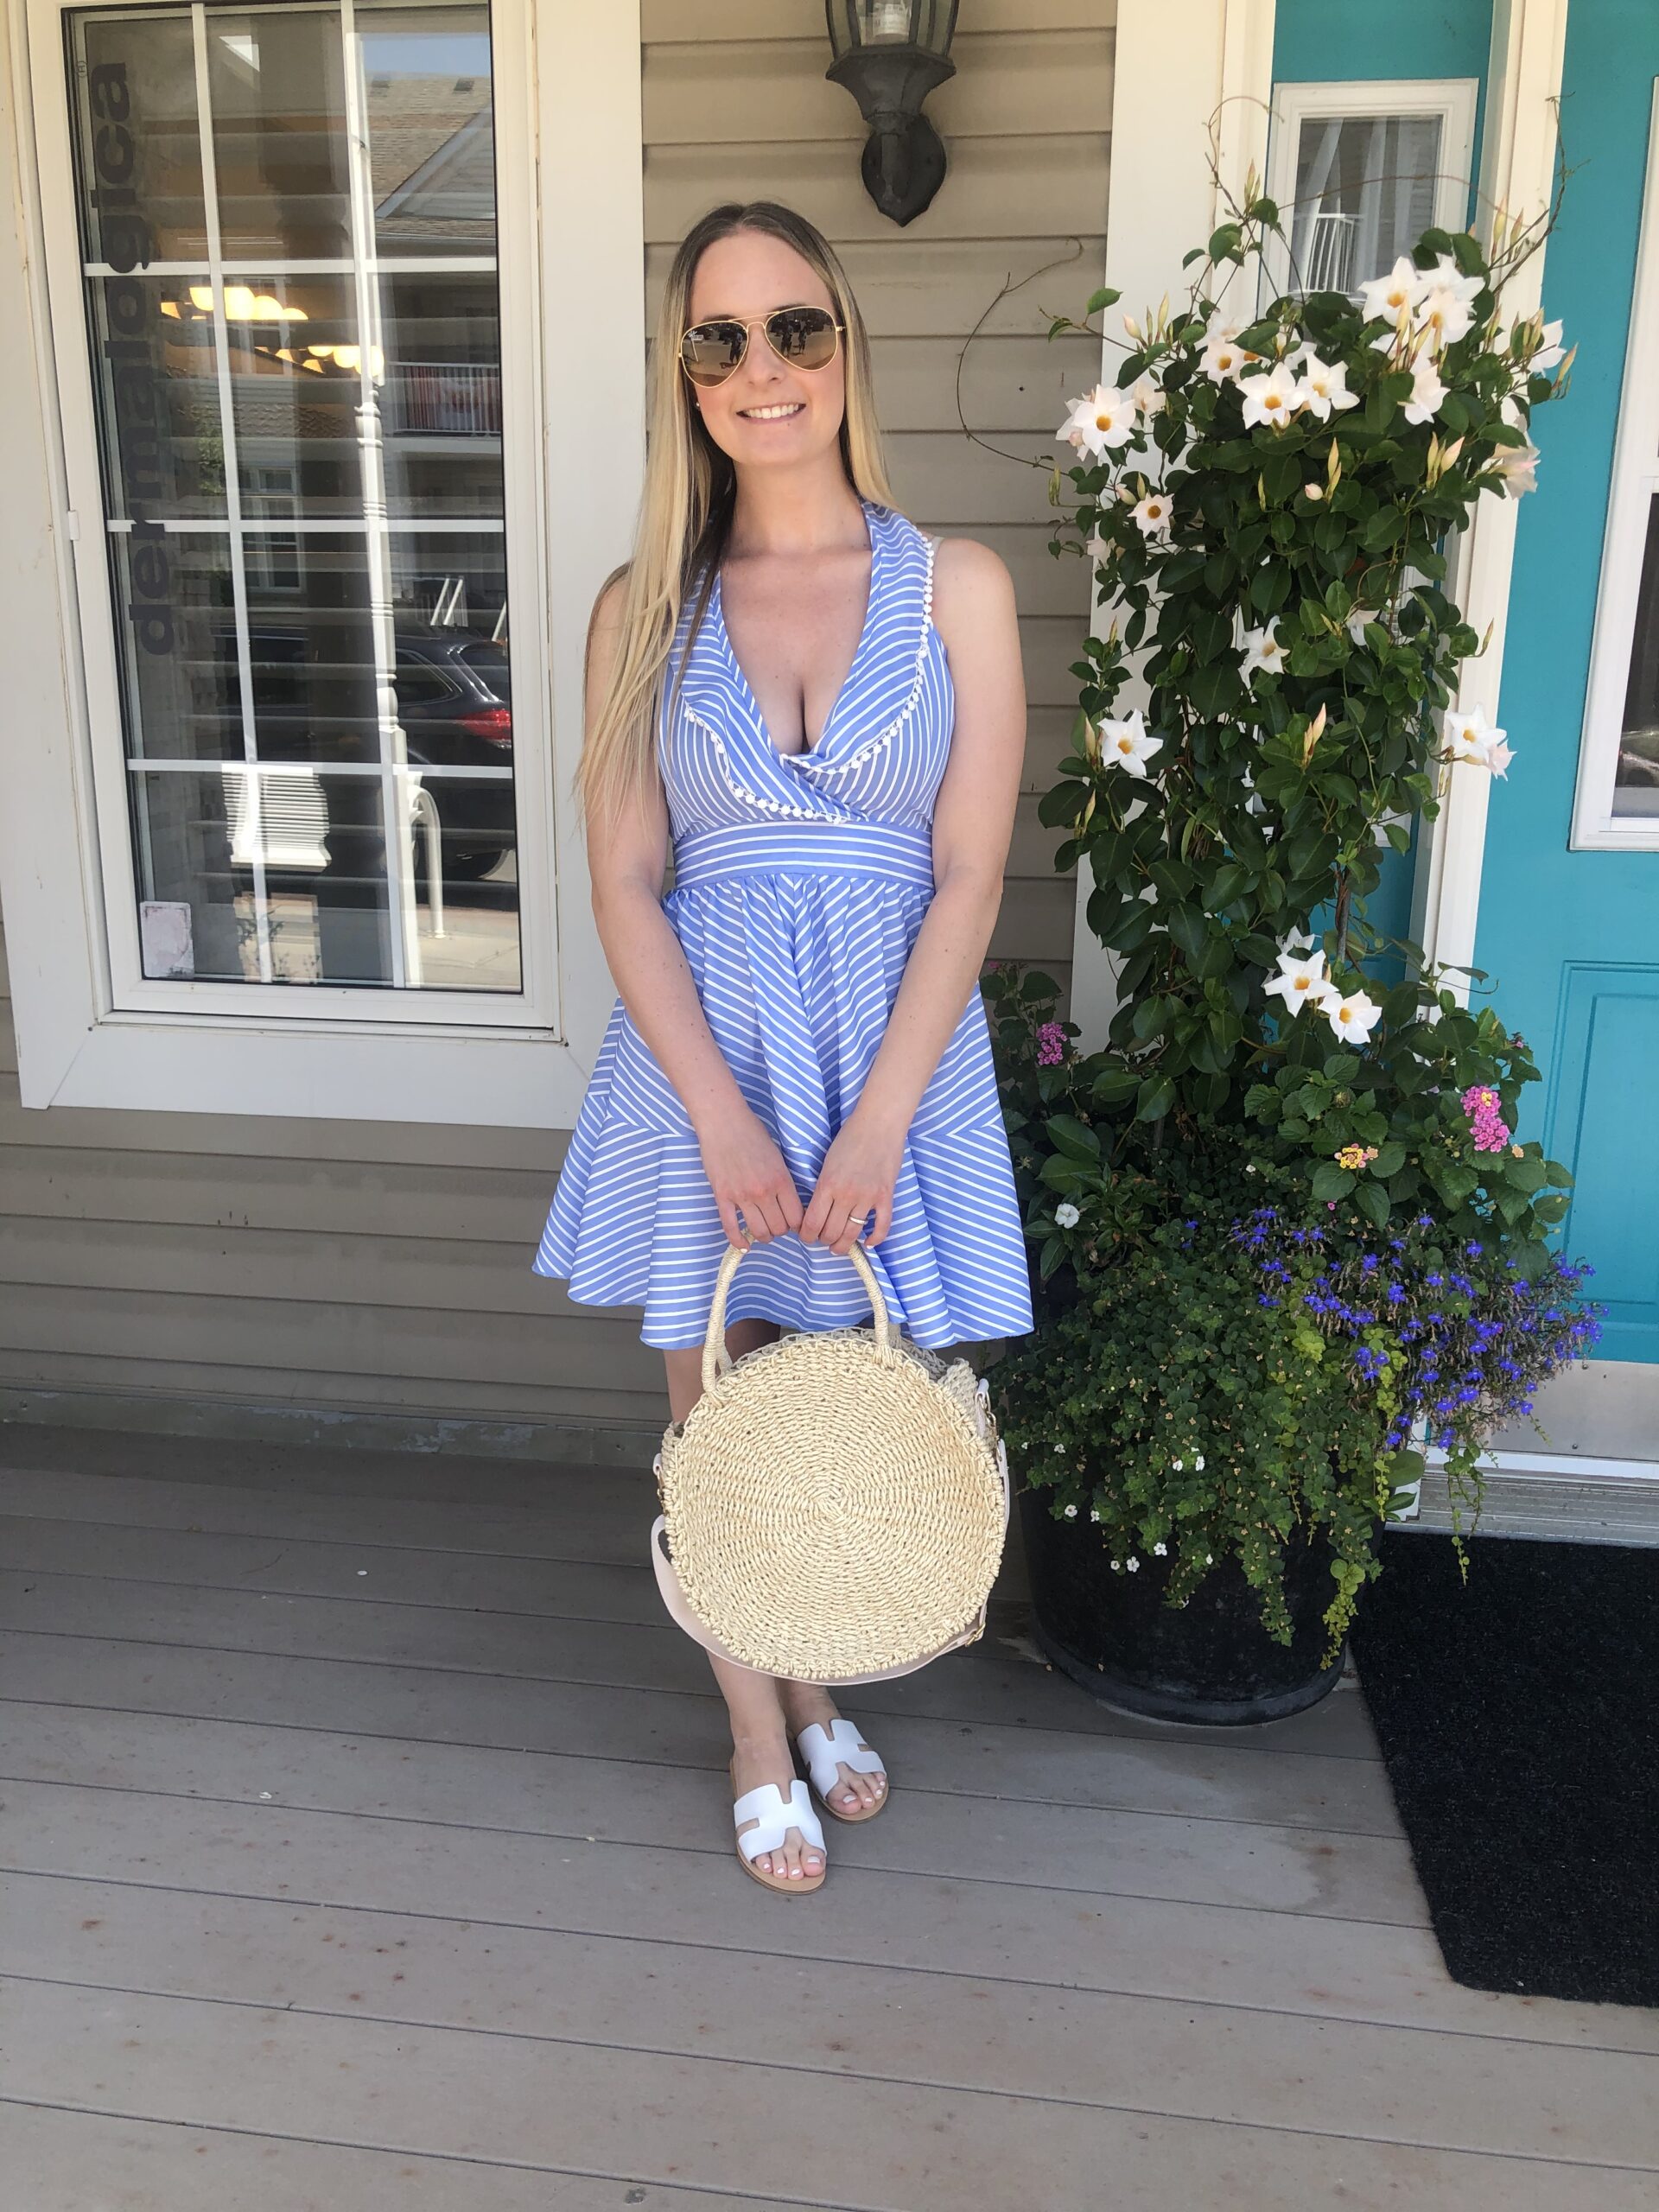 Shein Blue and white ruffle dress on livin' life with style